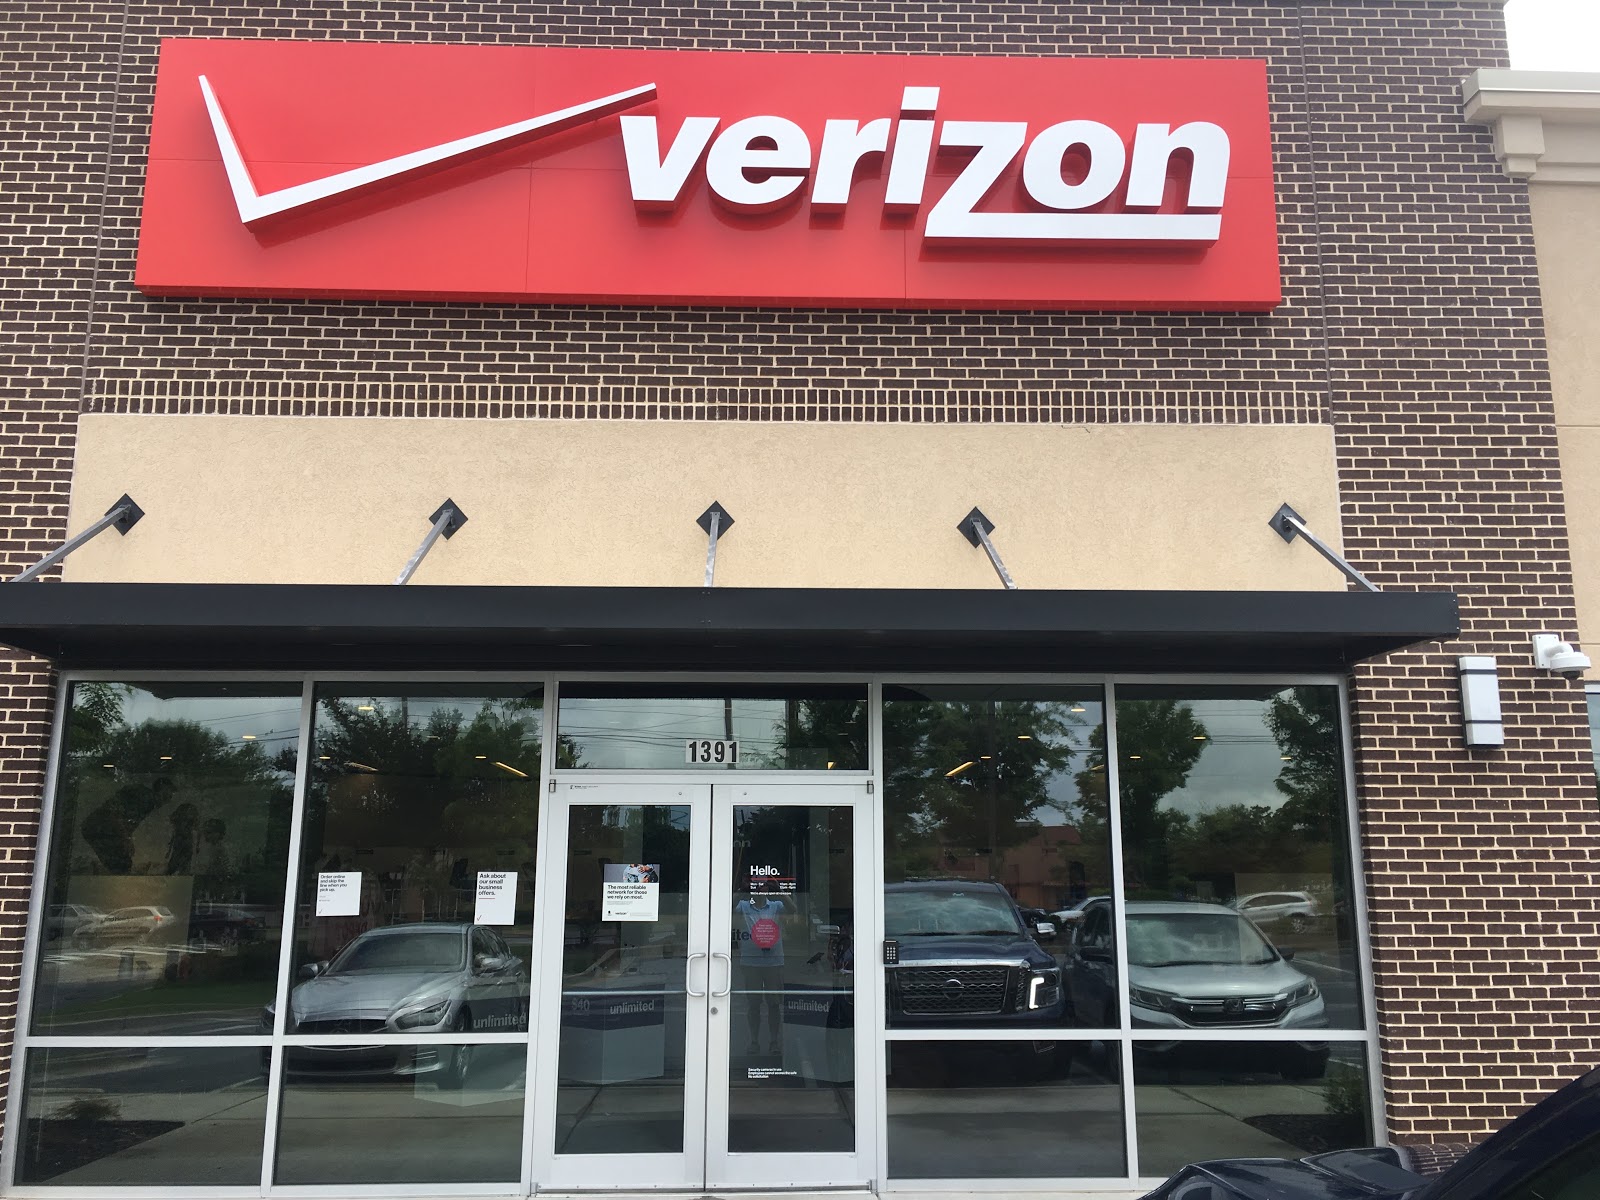 Commercial Verizon Awning